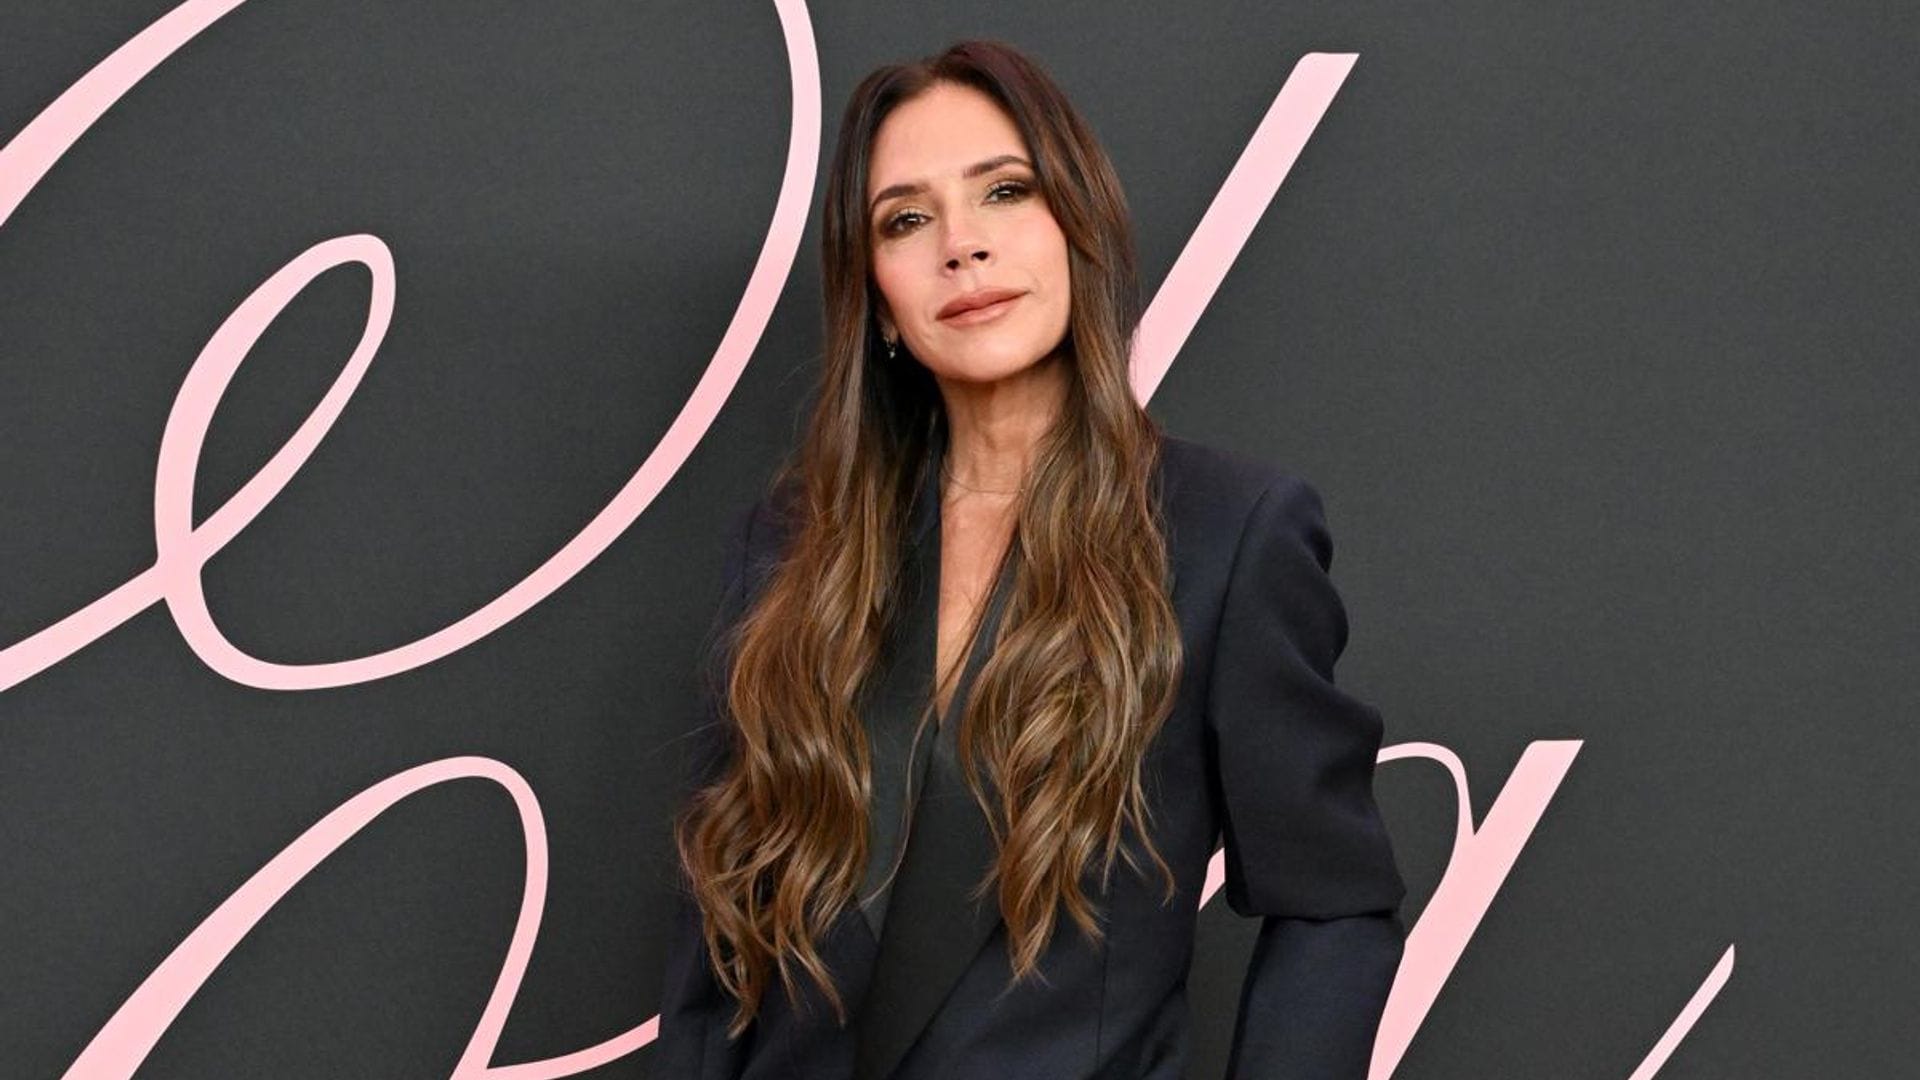 Victoria Beckham on why social media has helped her be viewed as ‘relatable’